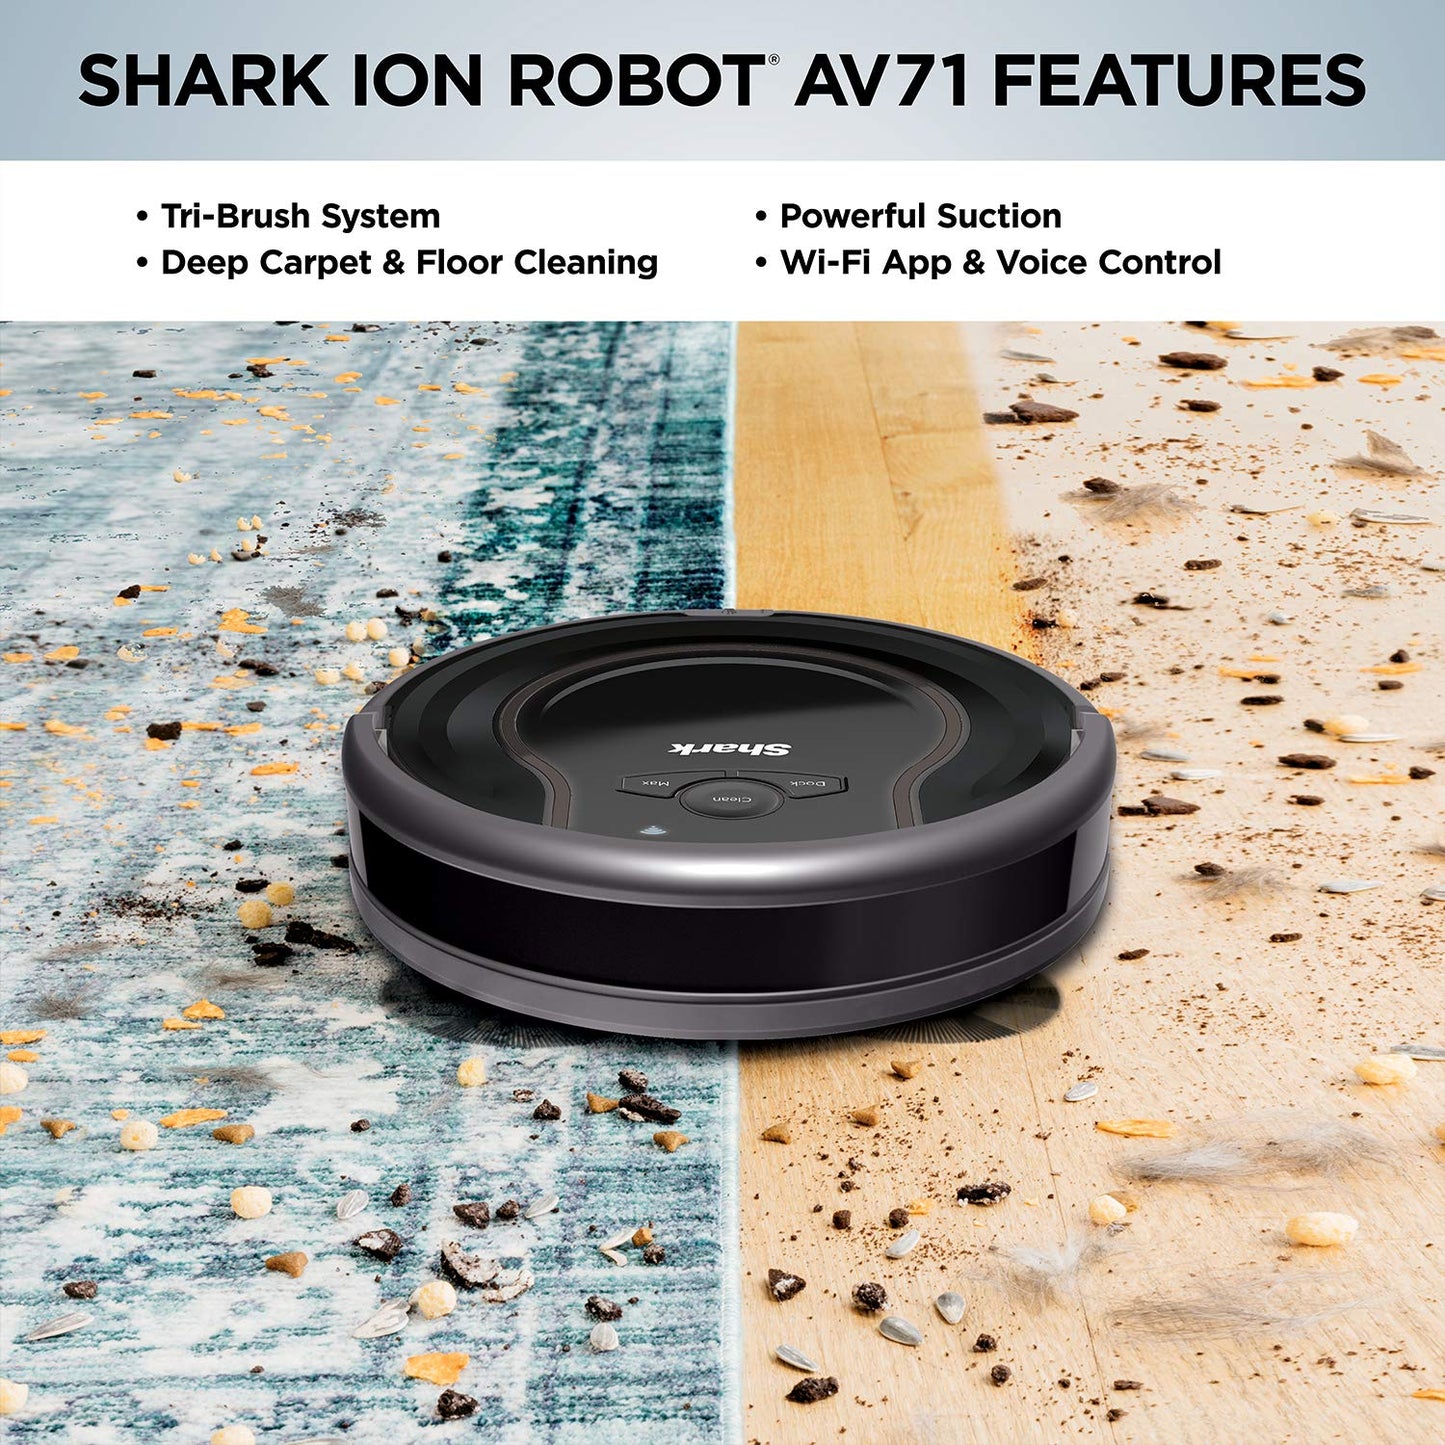 Vacuum Robot Wi-Fi Connected with Alexa Long Runtime Black